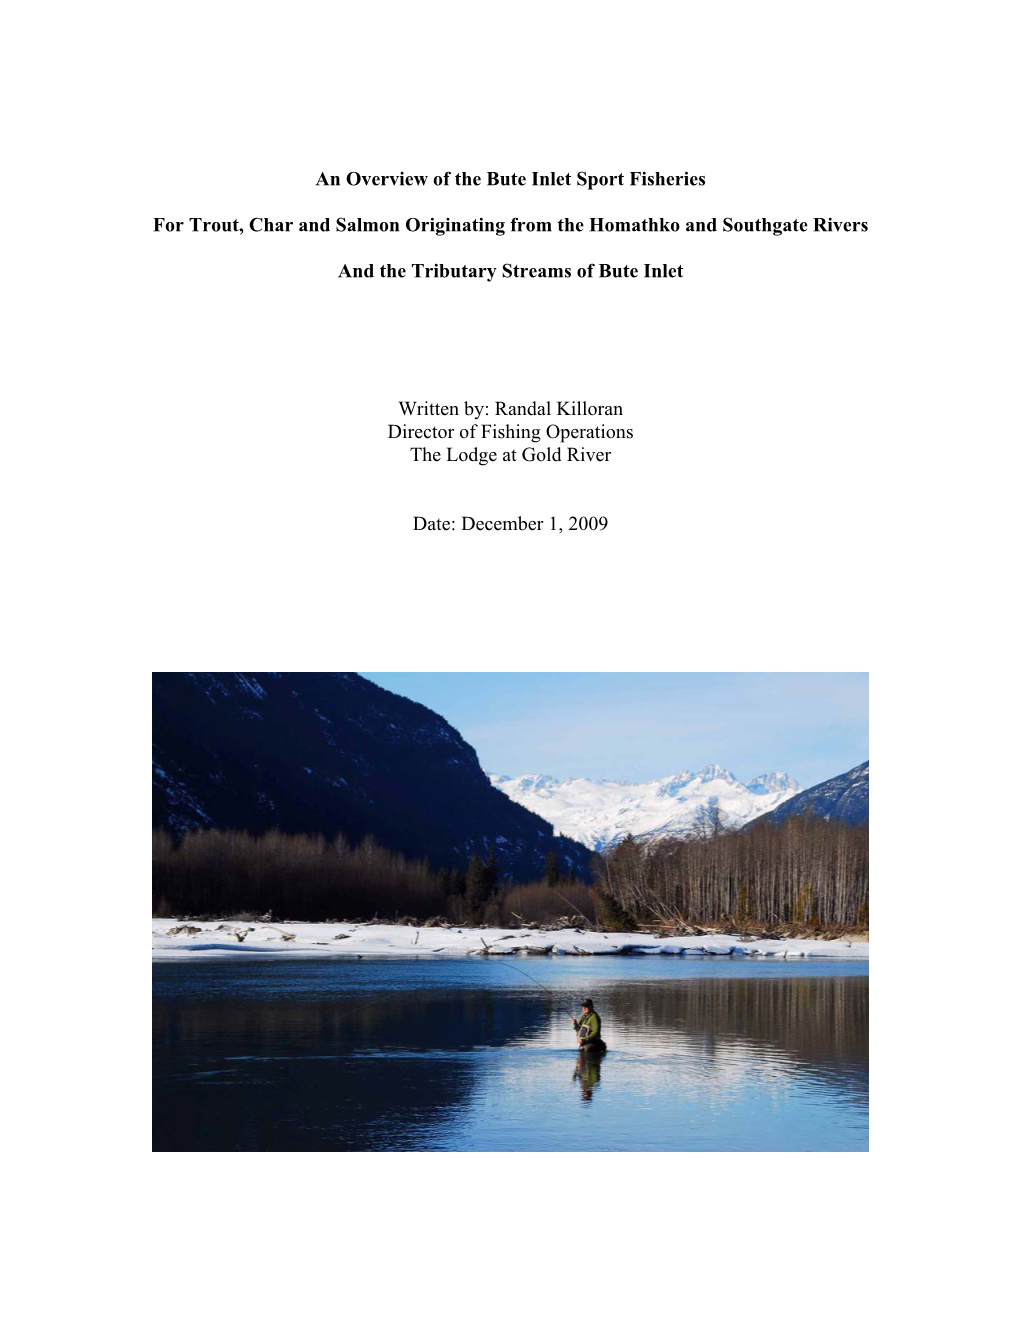 An Overview of the Bute Inlet Sport and Commercial Sport Fisheries